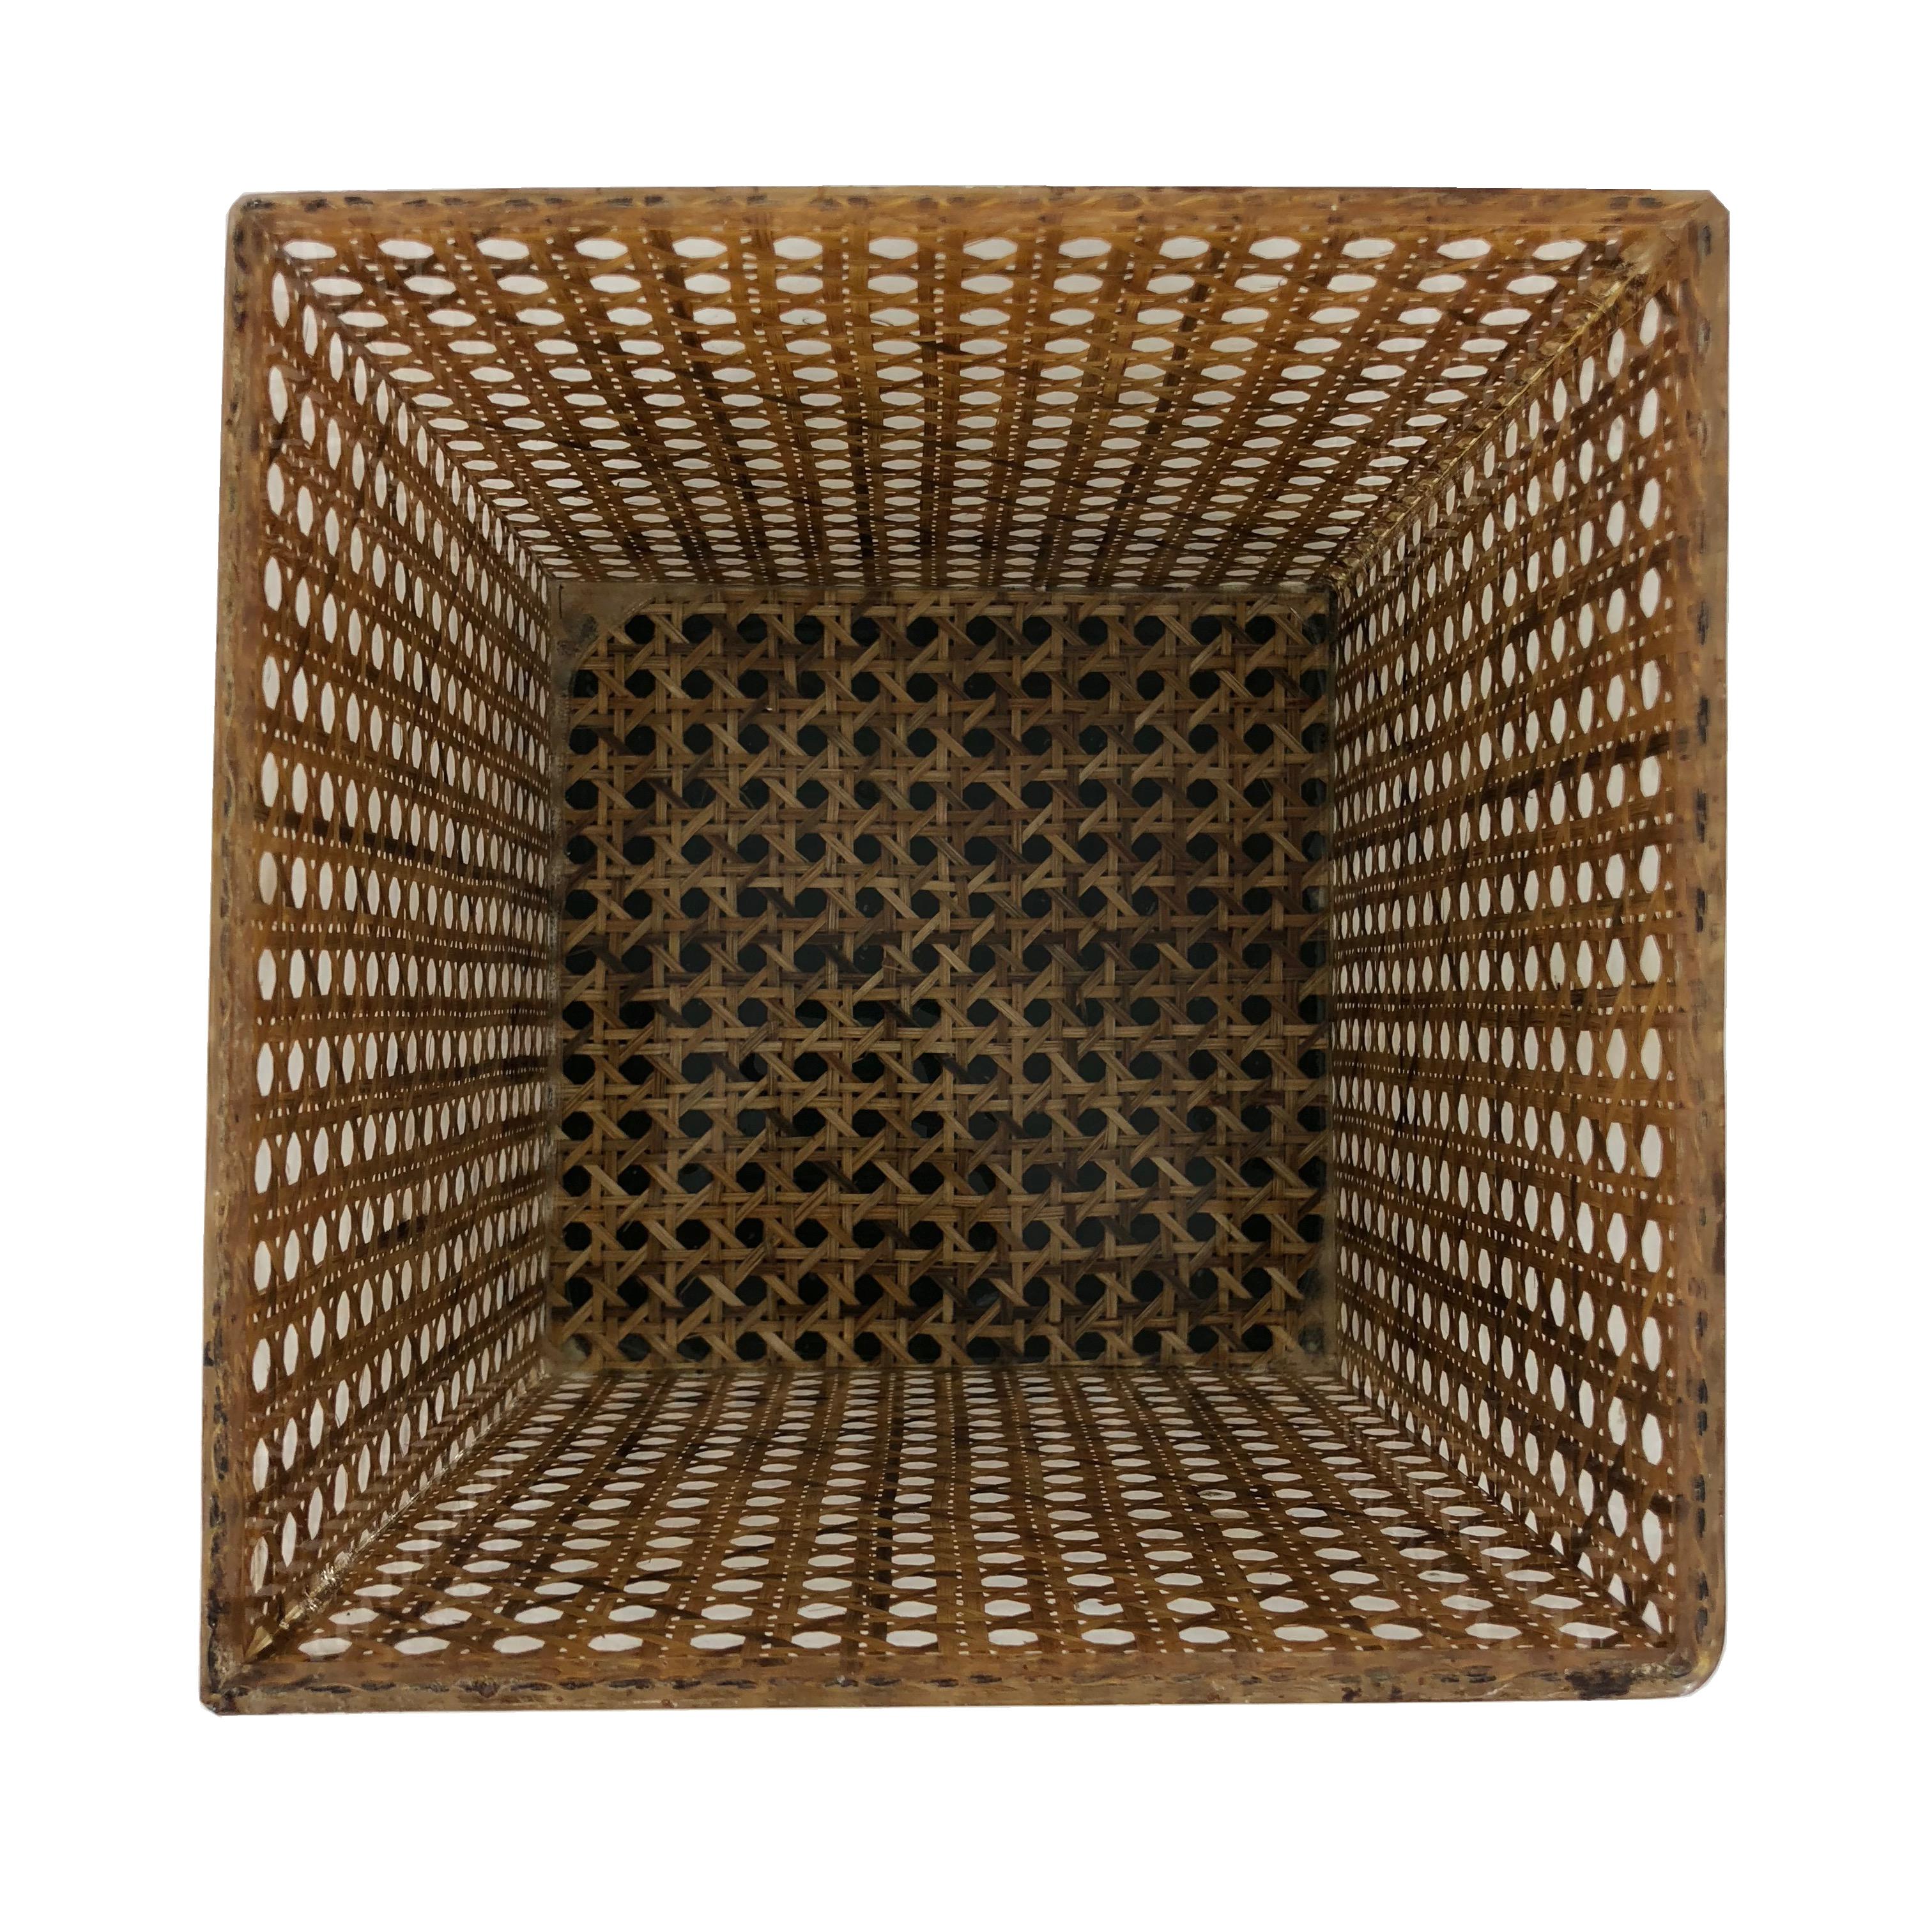 Late 20th Century Wicker Lucite Box Vase in Christian Dior Style